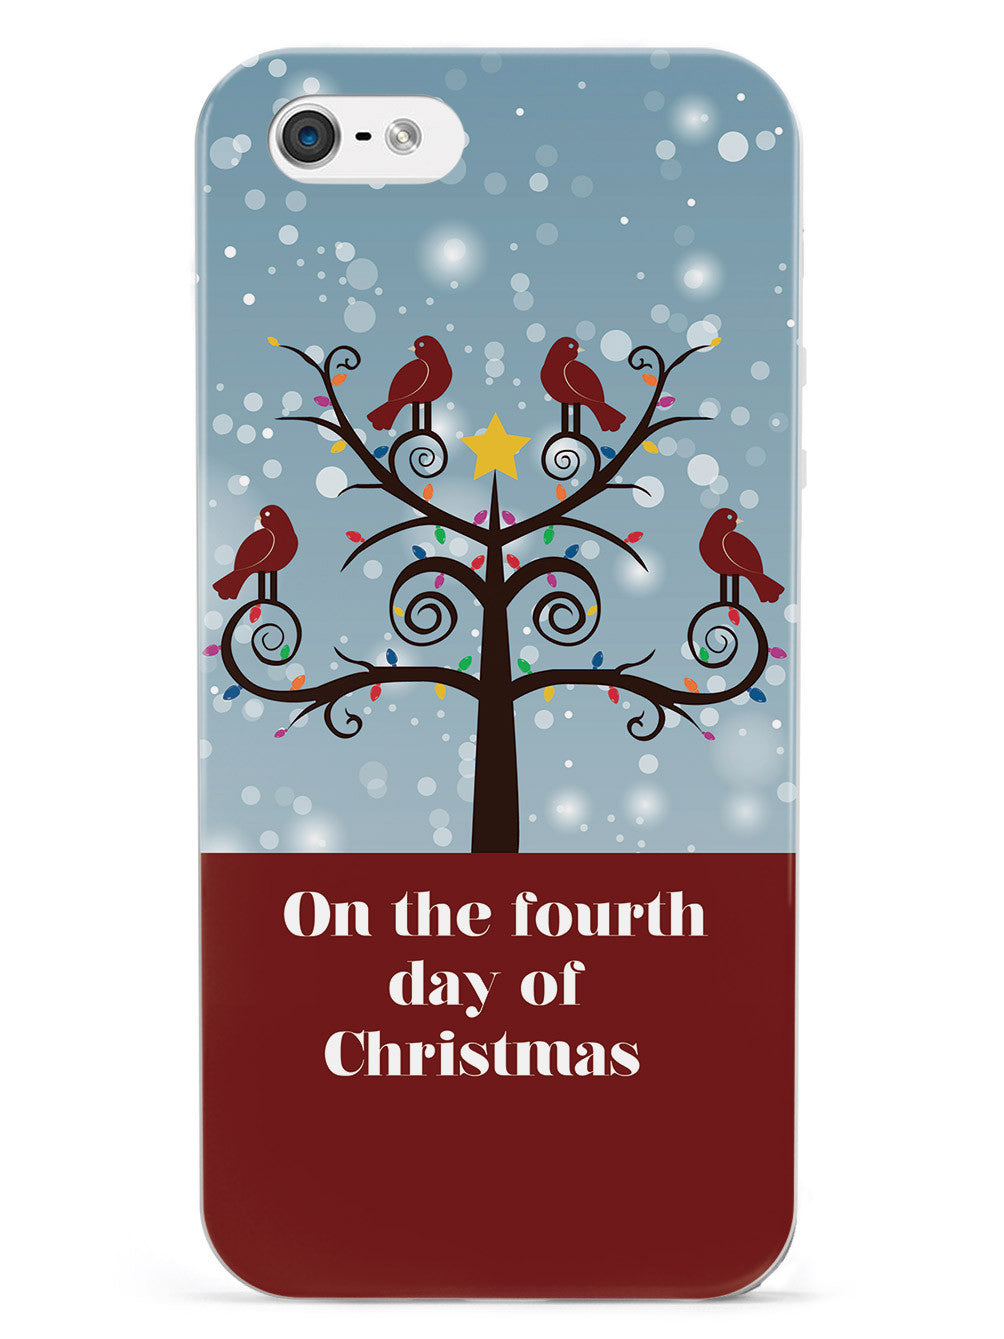 On the Fourth Day of Christmas - Four Calling Birds Case